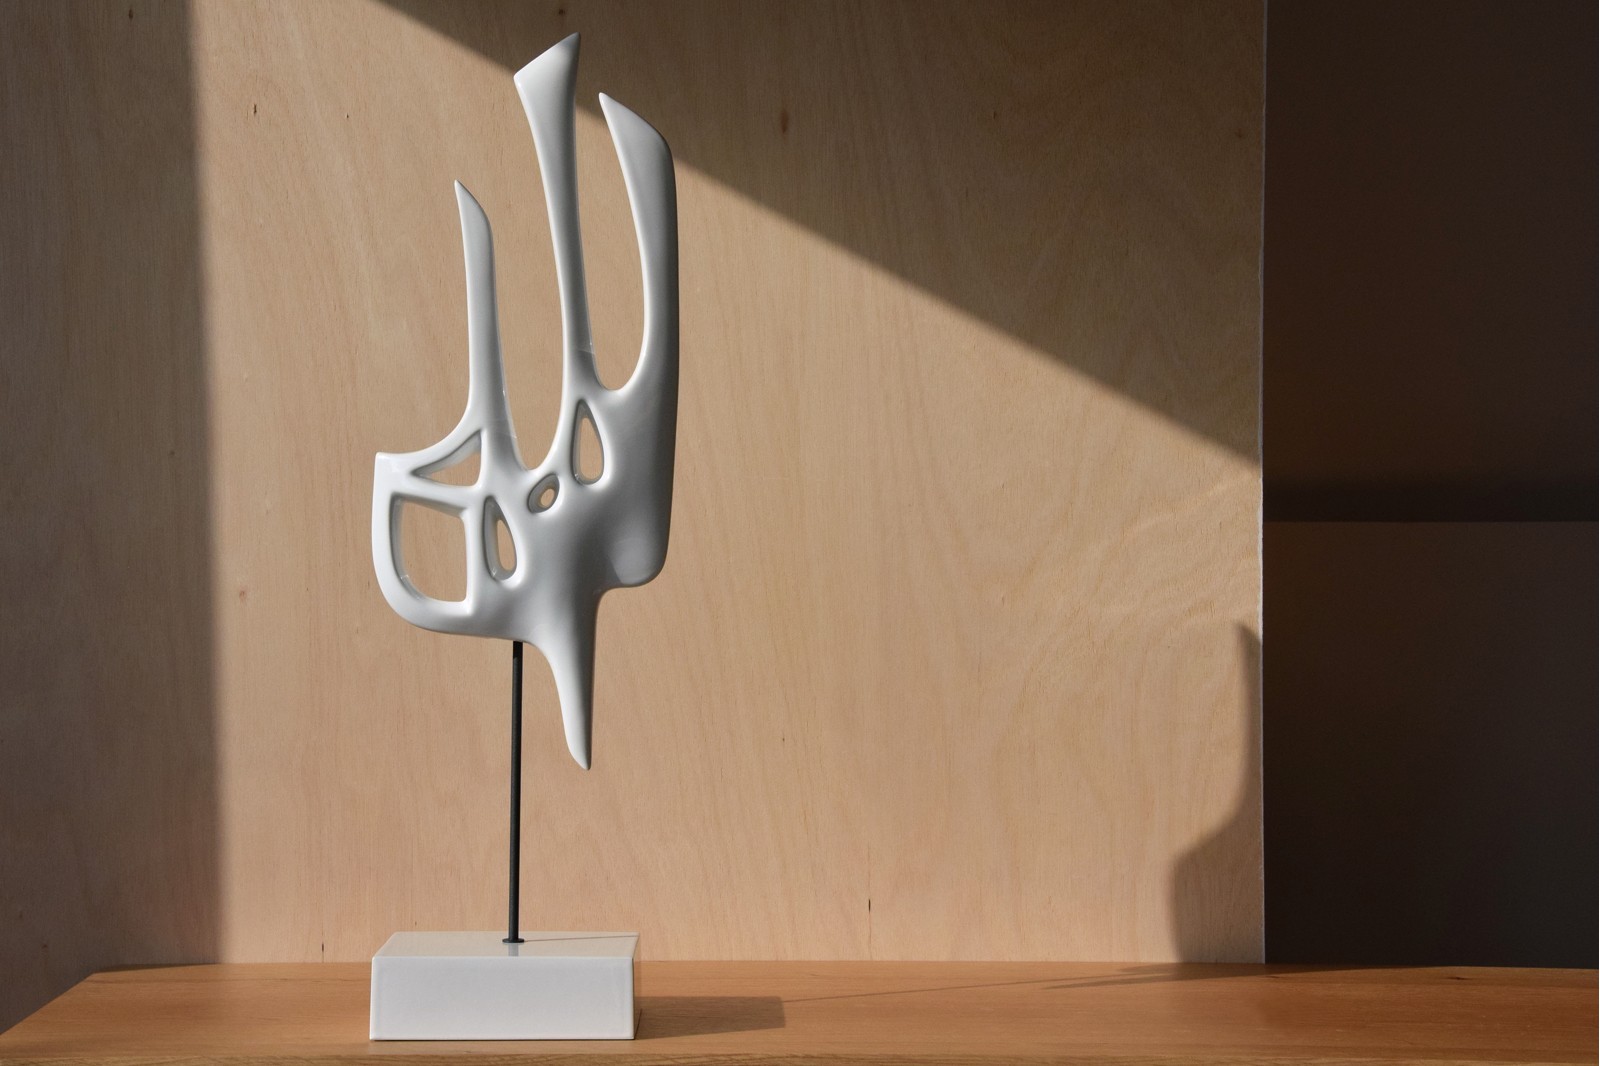 ABSTRACT BIRD COLLECTION. GLOSS WHITE CERAMIC SCULPTURE